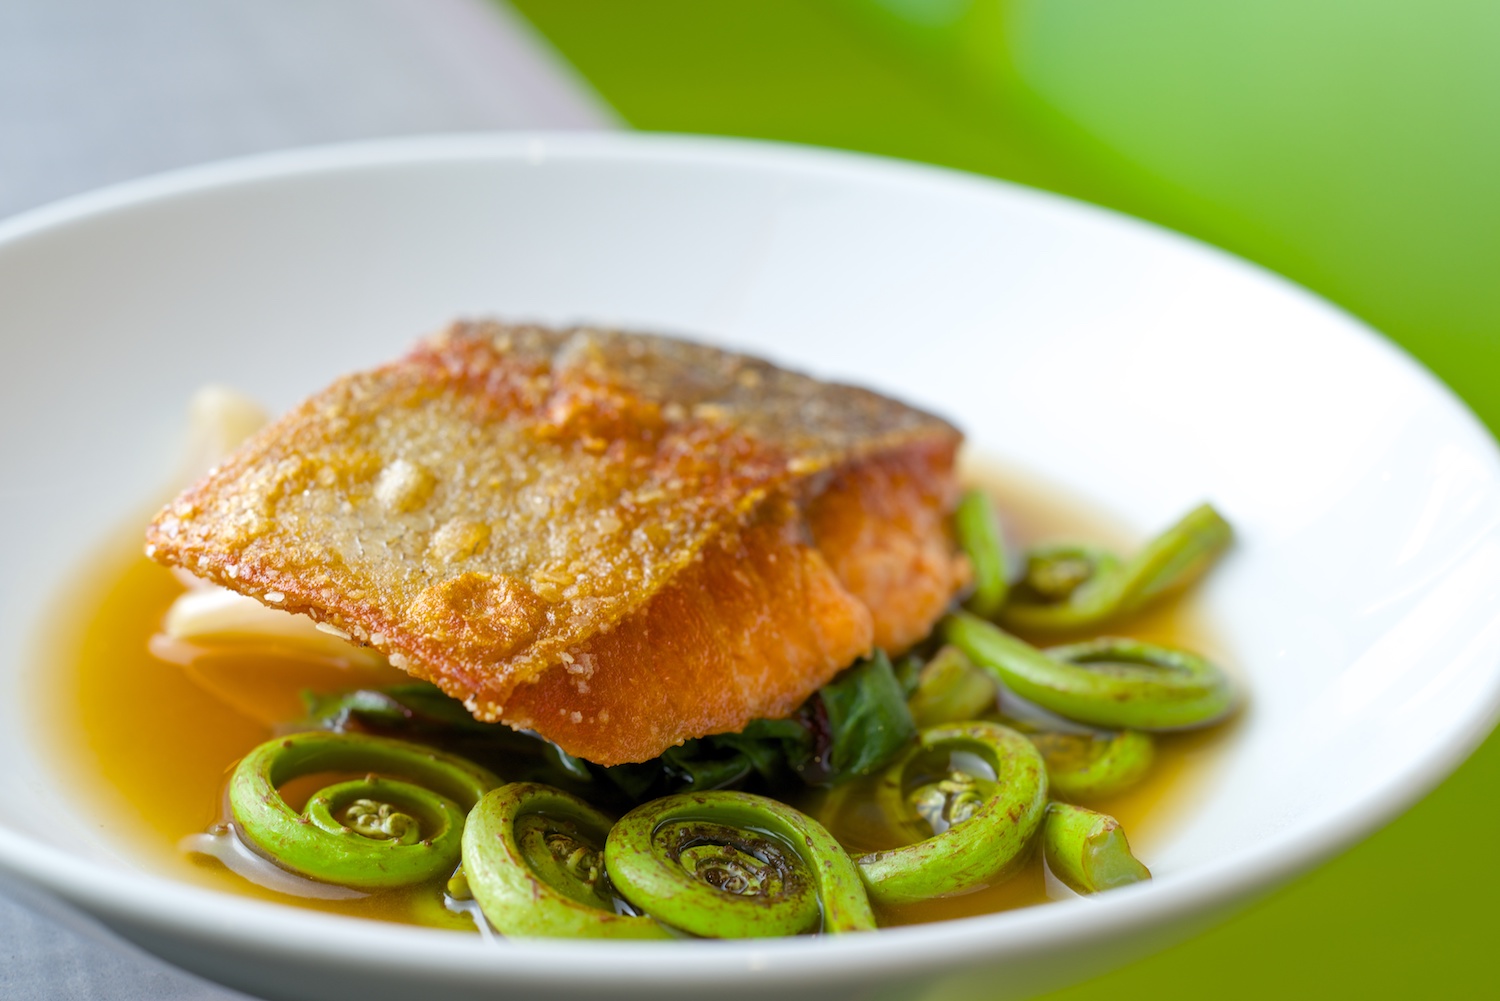 Columbia River Steelhead with fiddleheads, chard, roasted shallots, bacon & ginger broth.